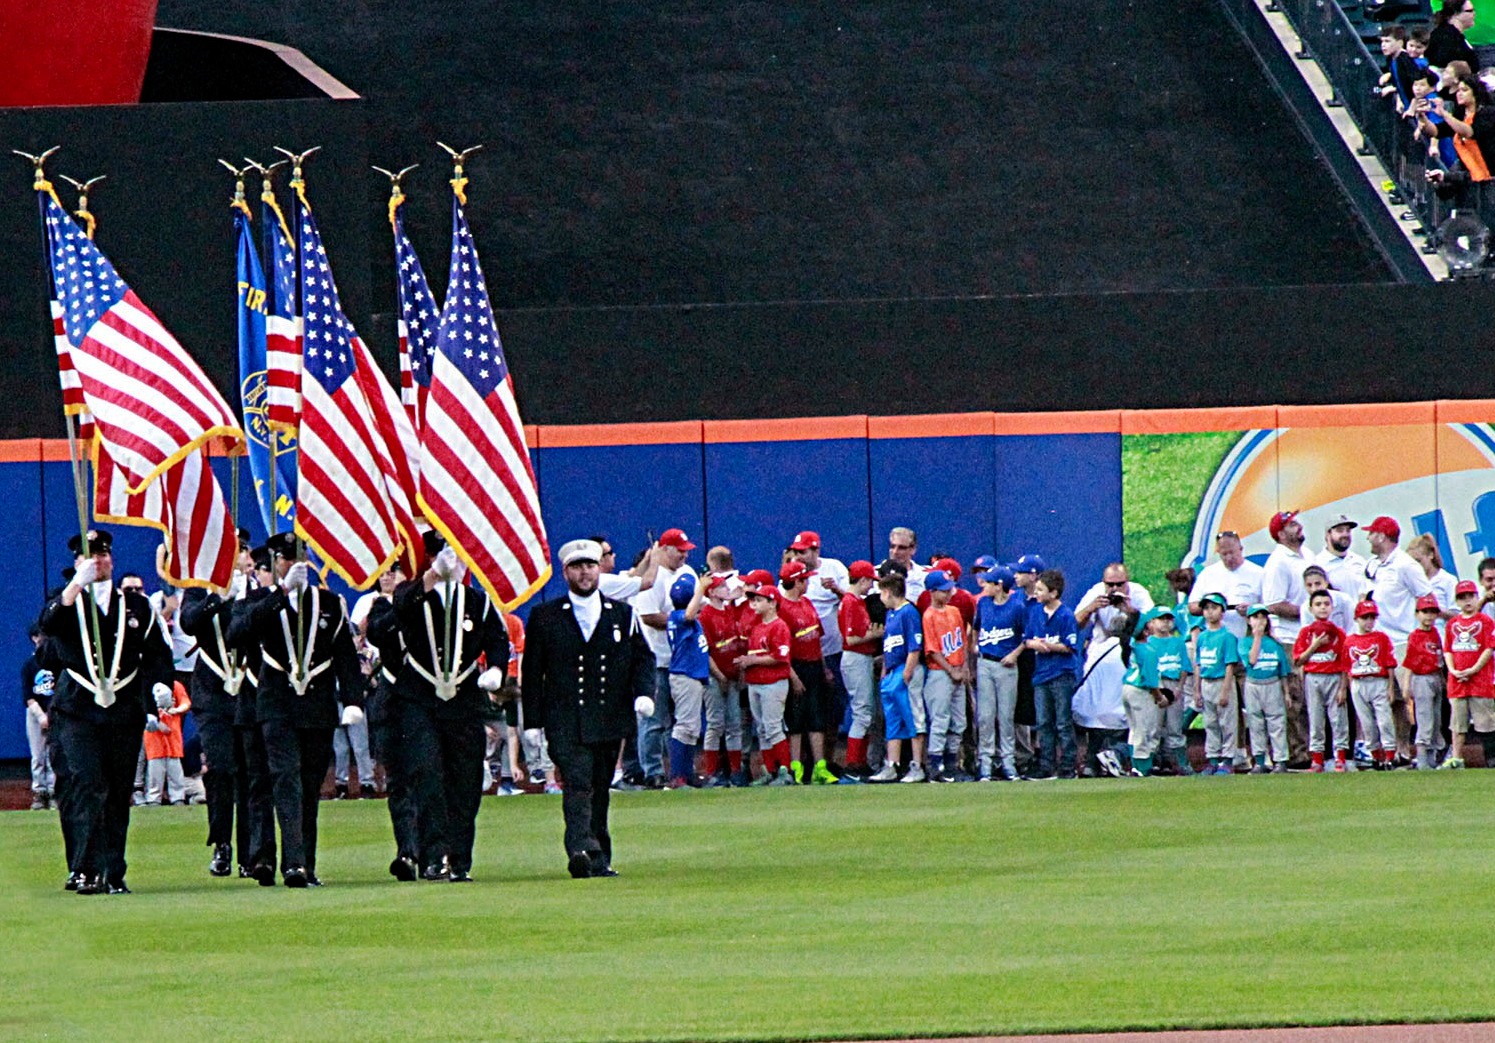 THe Lynbrook Fire Department’s Color Guard marched onto the field as the Little Leaguers watched.